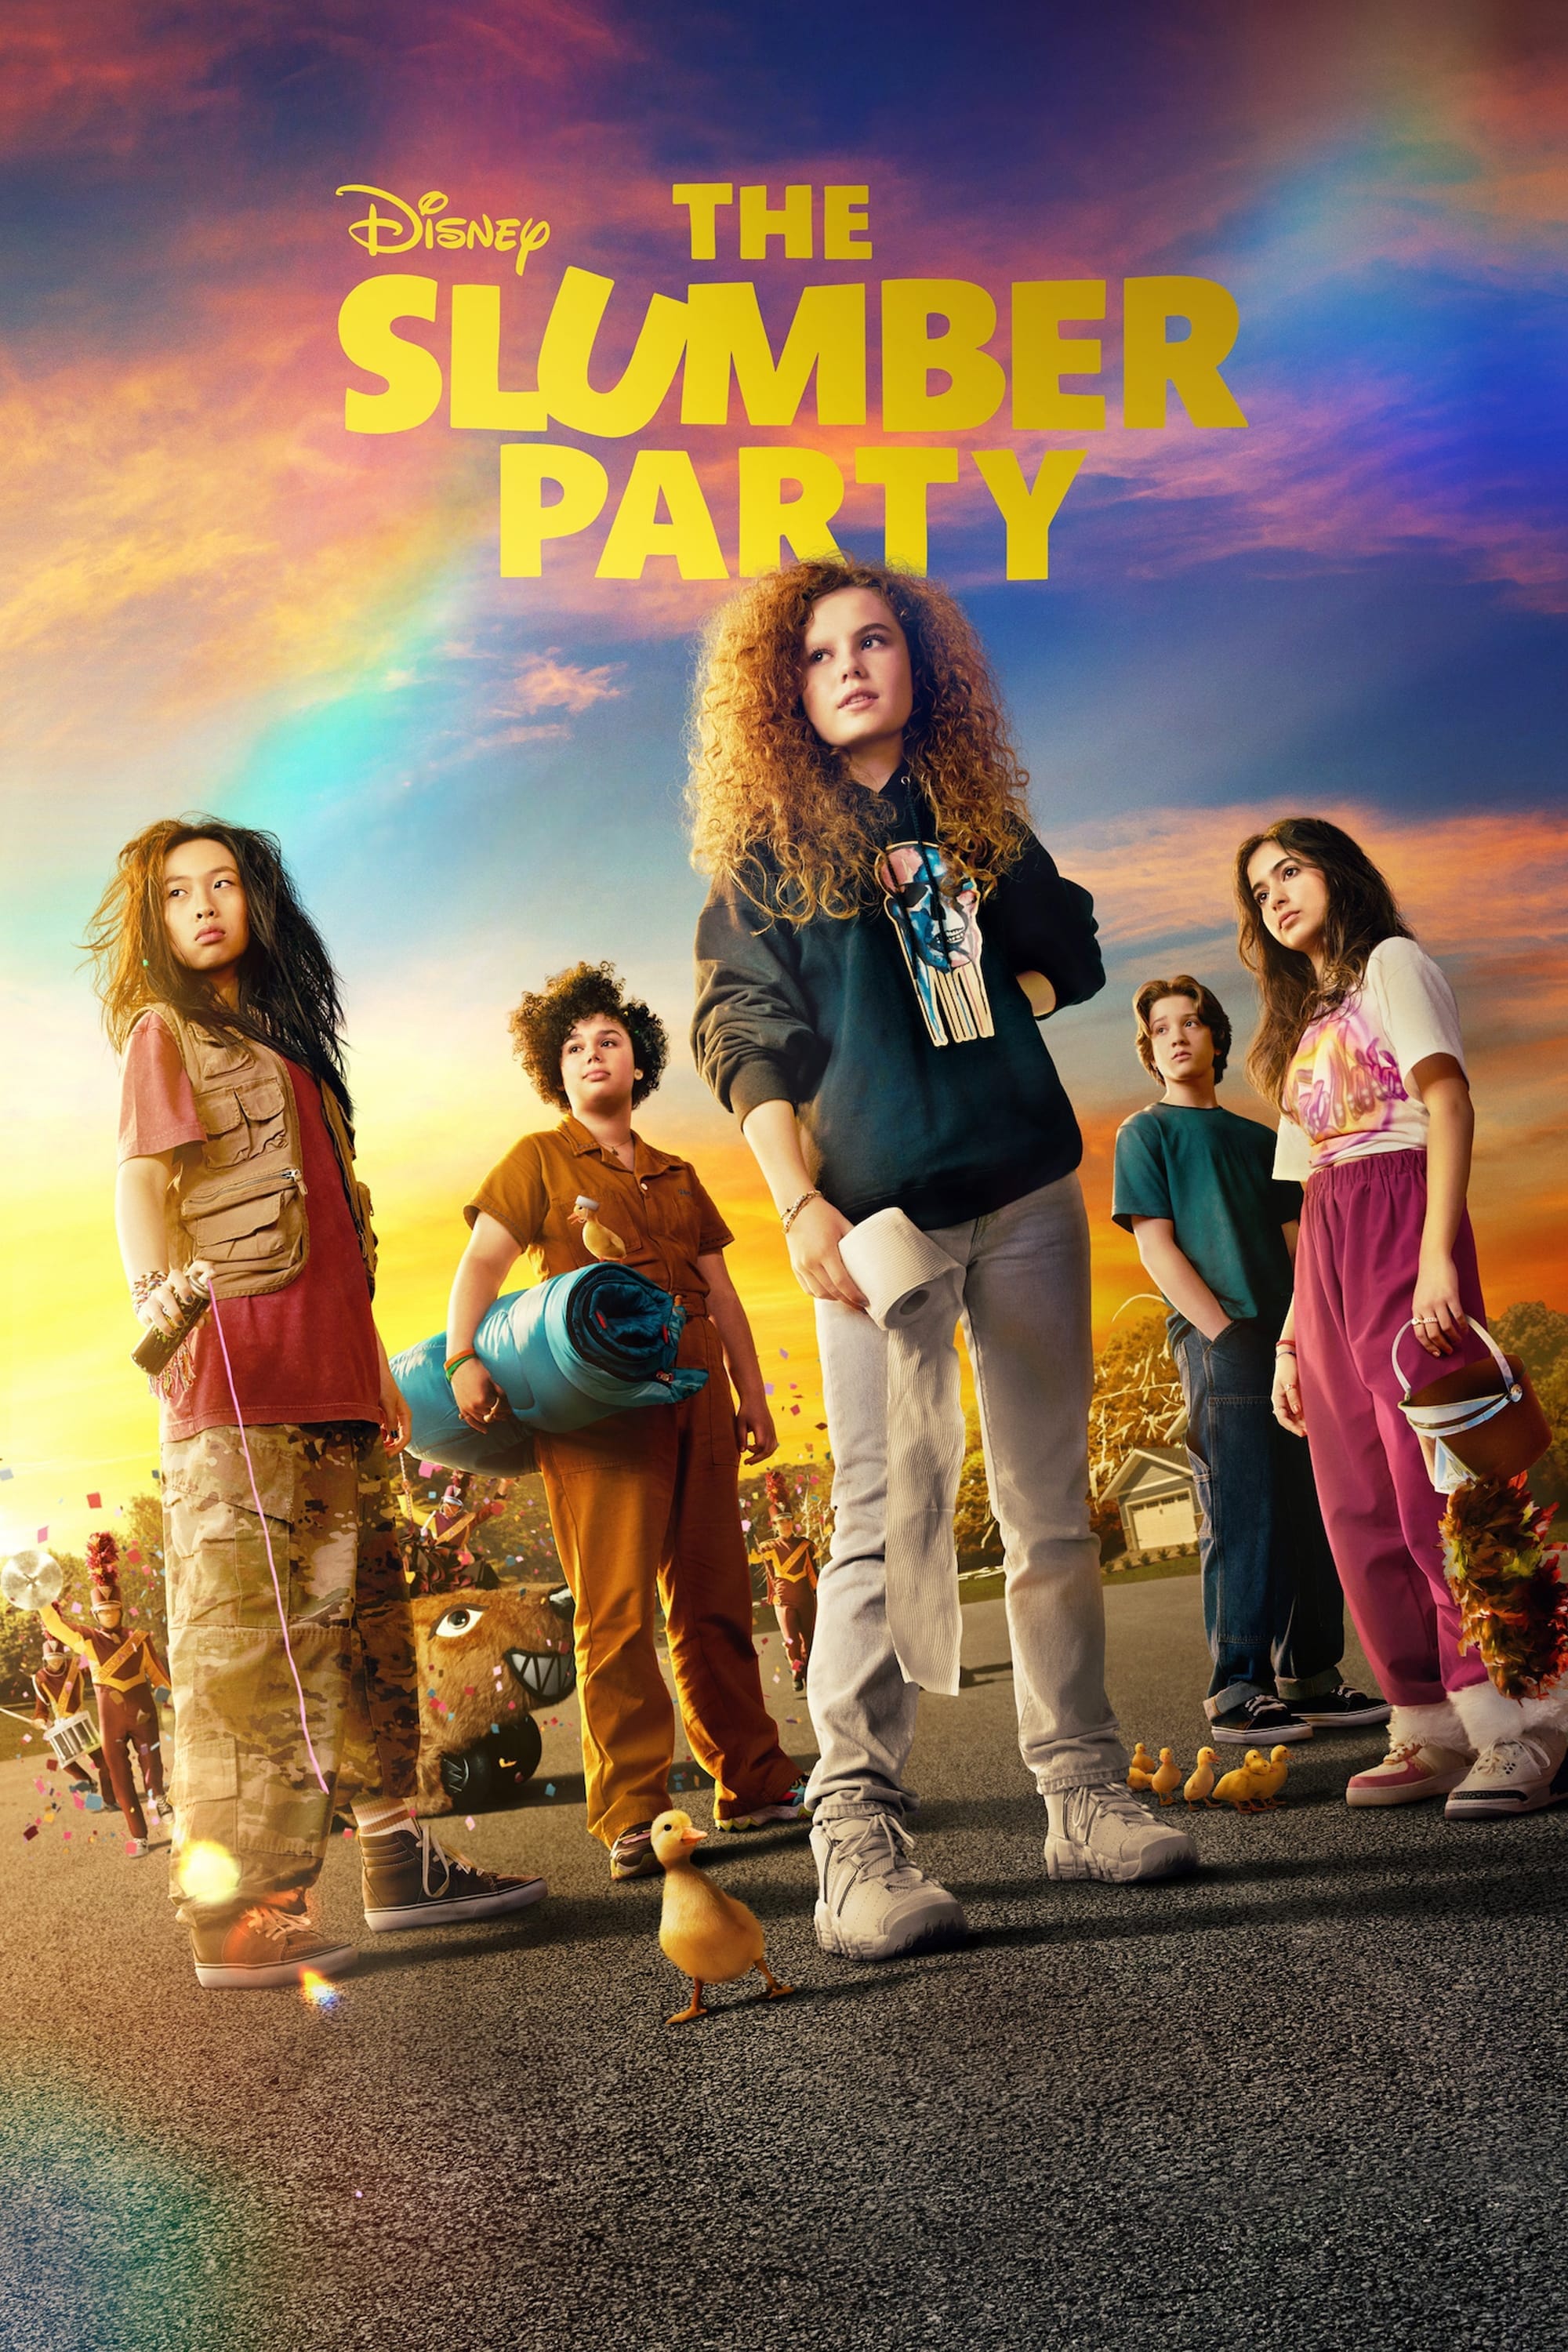 [WATCH 71+] The Slumber Party (2023) FULL MOVIE ONLINE FREE ENGLISH/Dub/SUB Comedy STREAMINGS ������ Movie Poster